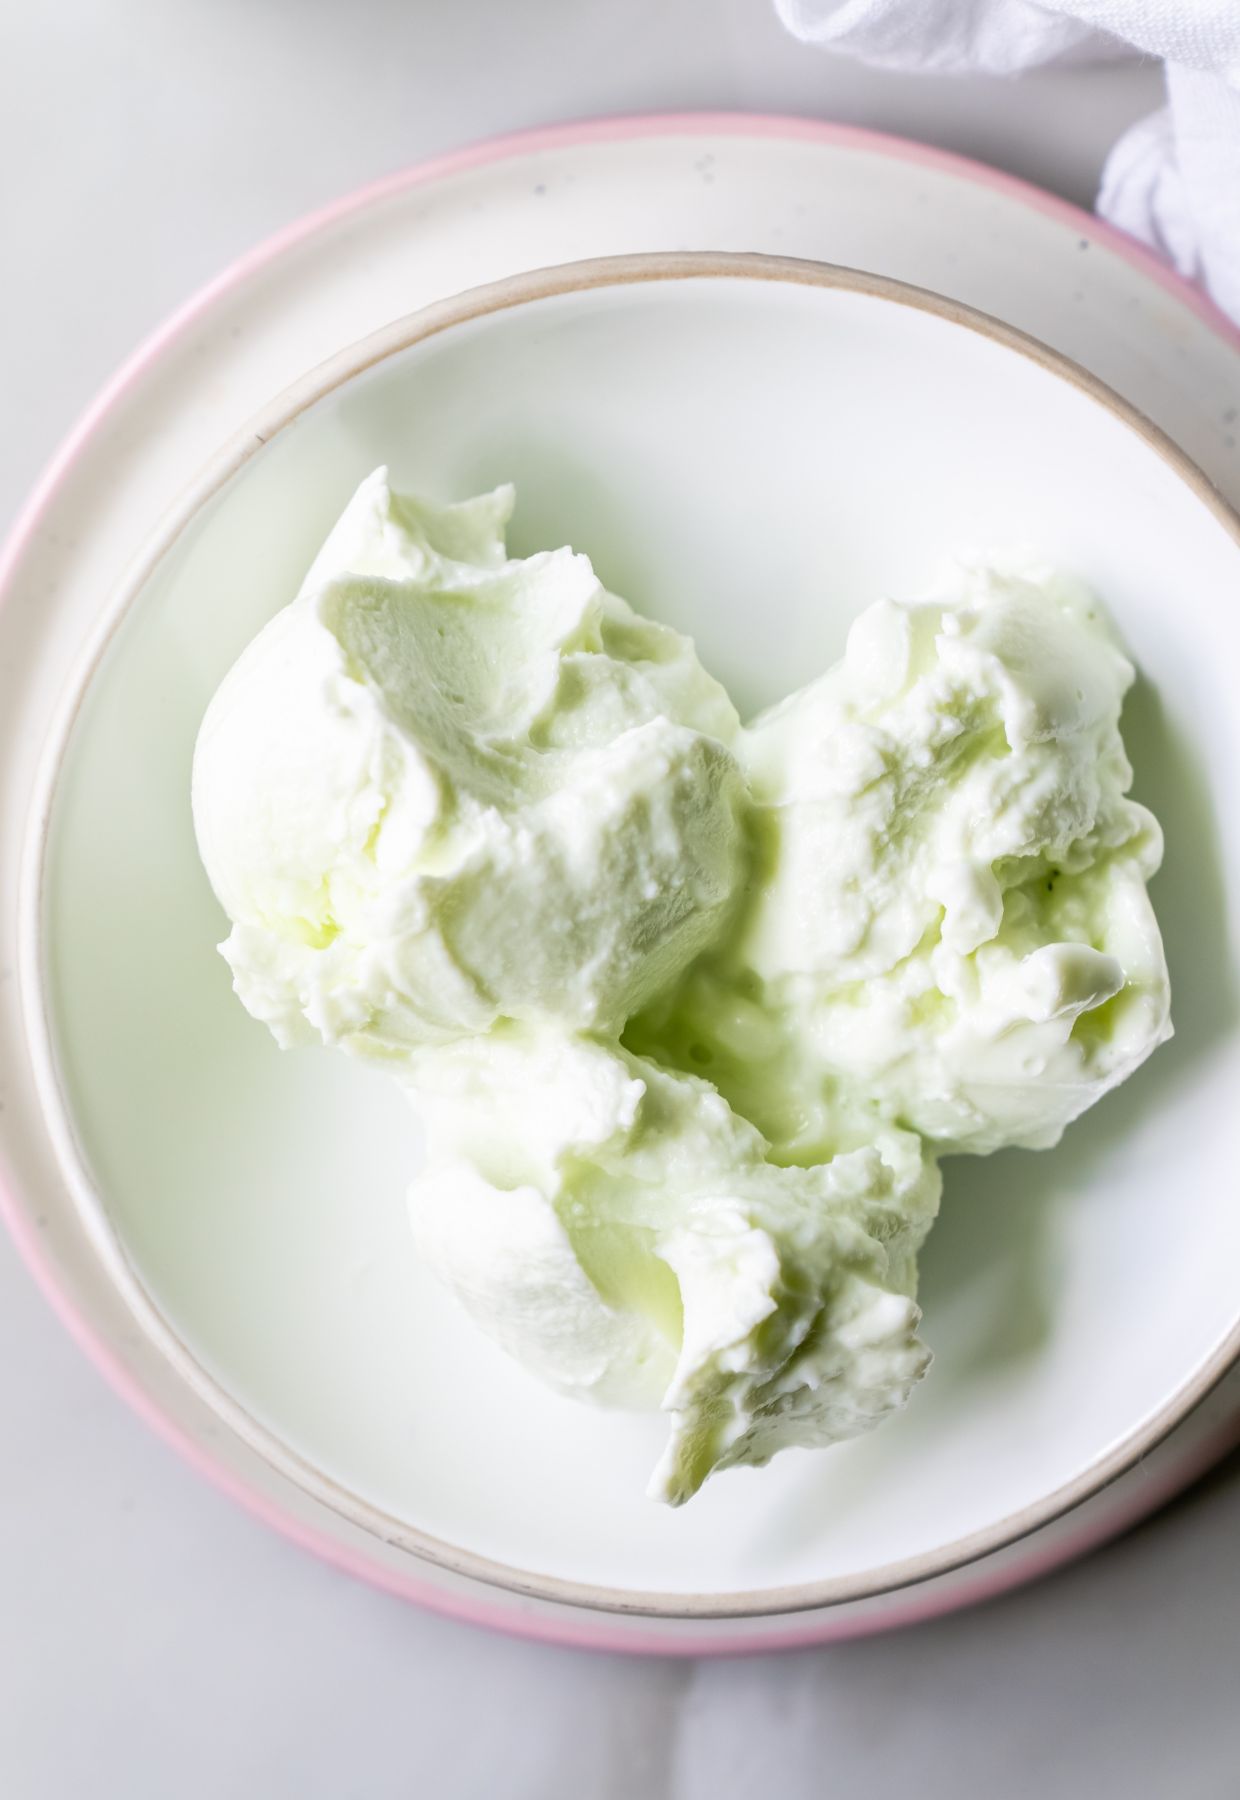 A white plate with three scoops of light green ice cream, a delightful example of gourmet desserts.